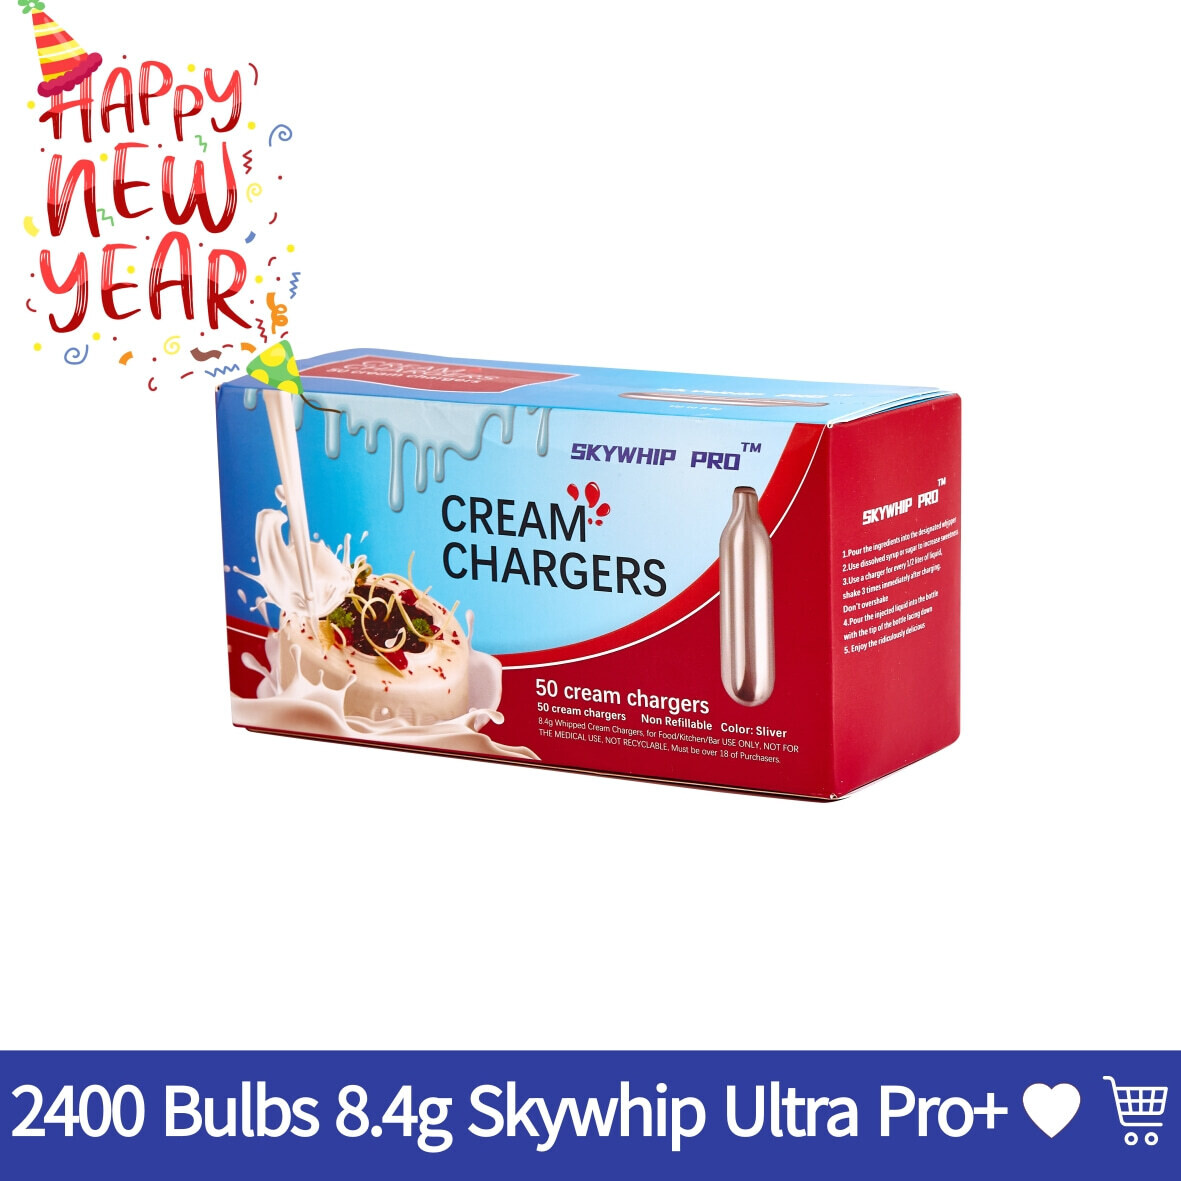 Cream Chargers: 2400 Bulbs 8.4g Skywhip Ultra Pro+ Pure Professional